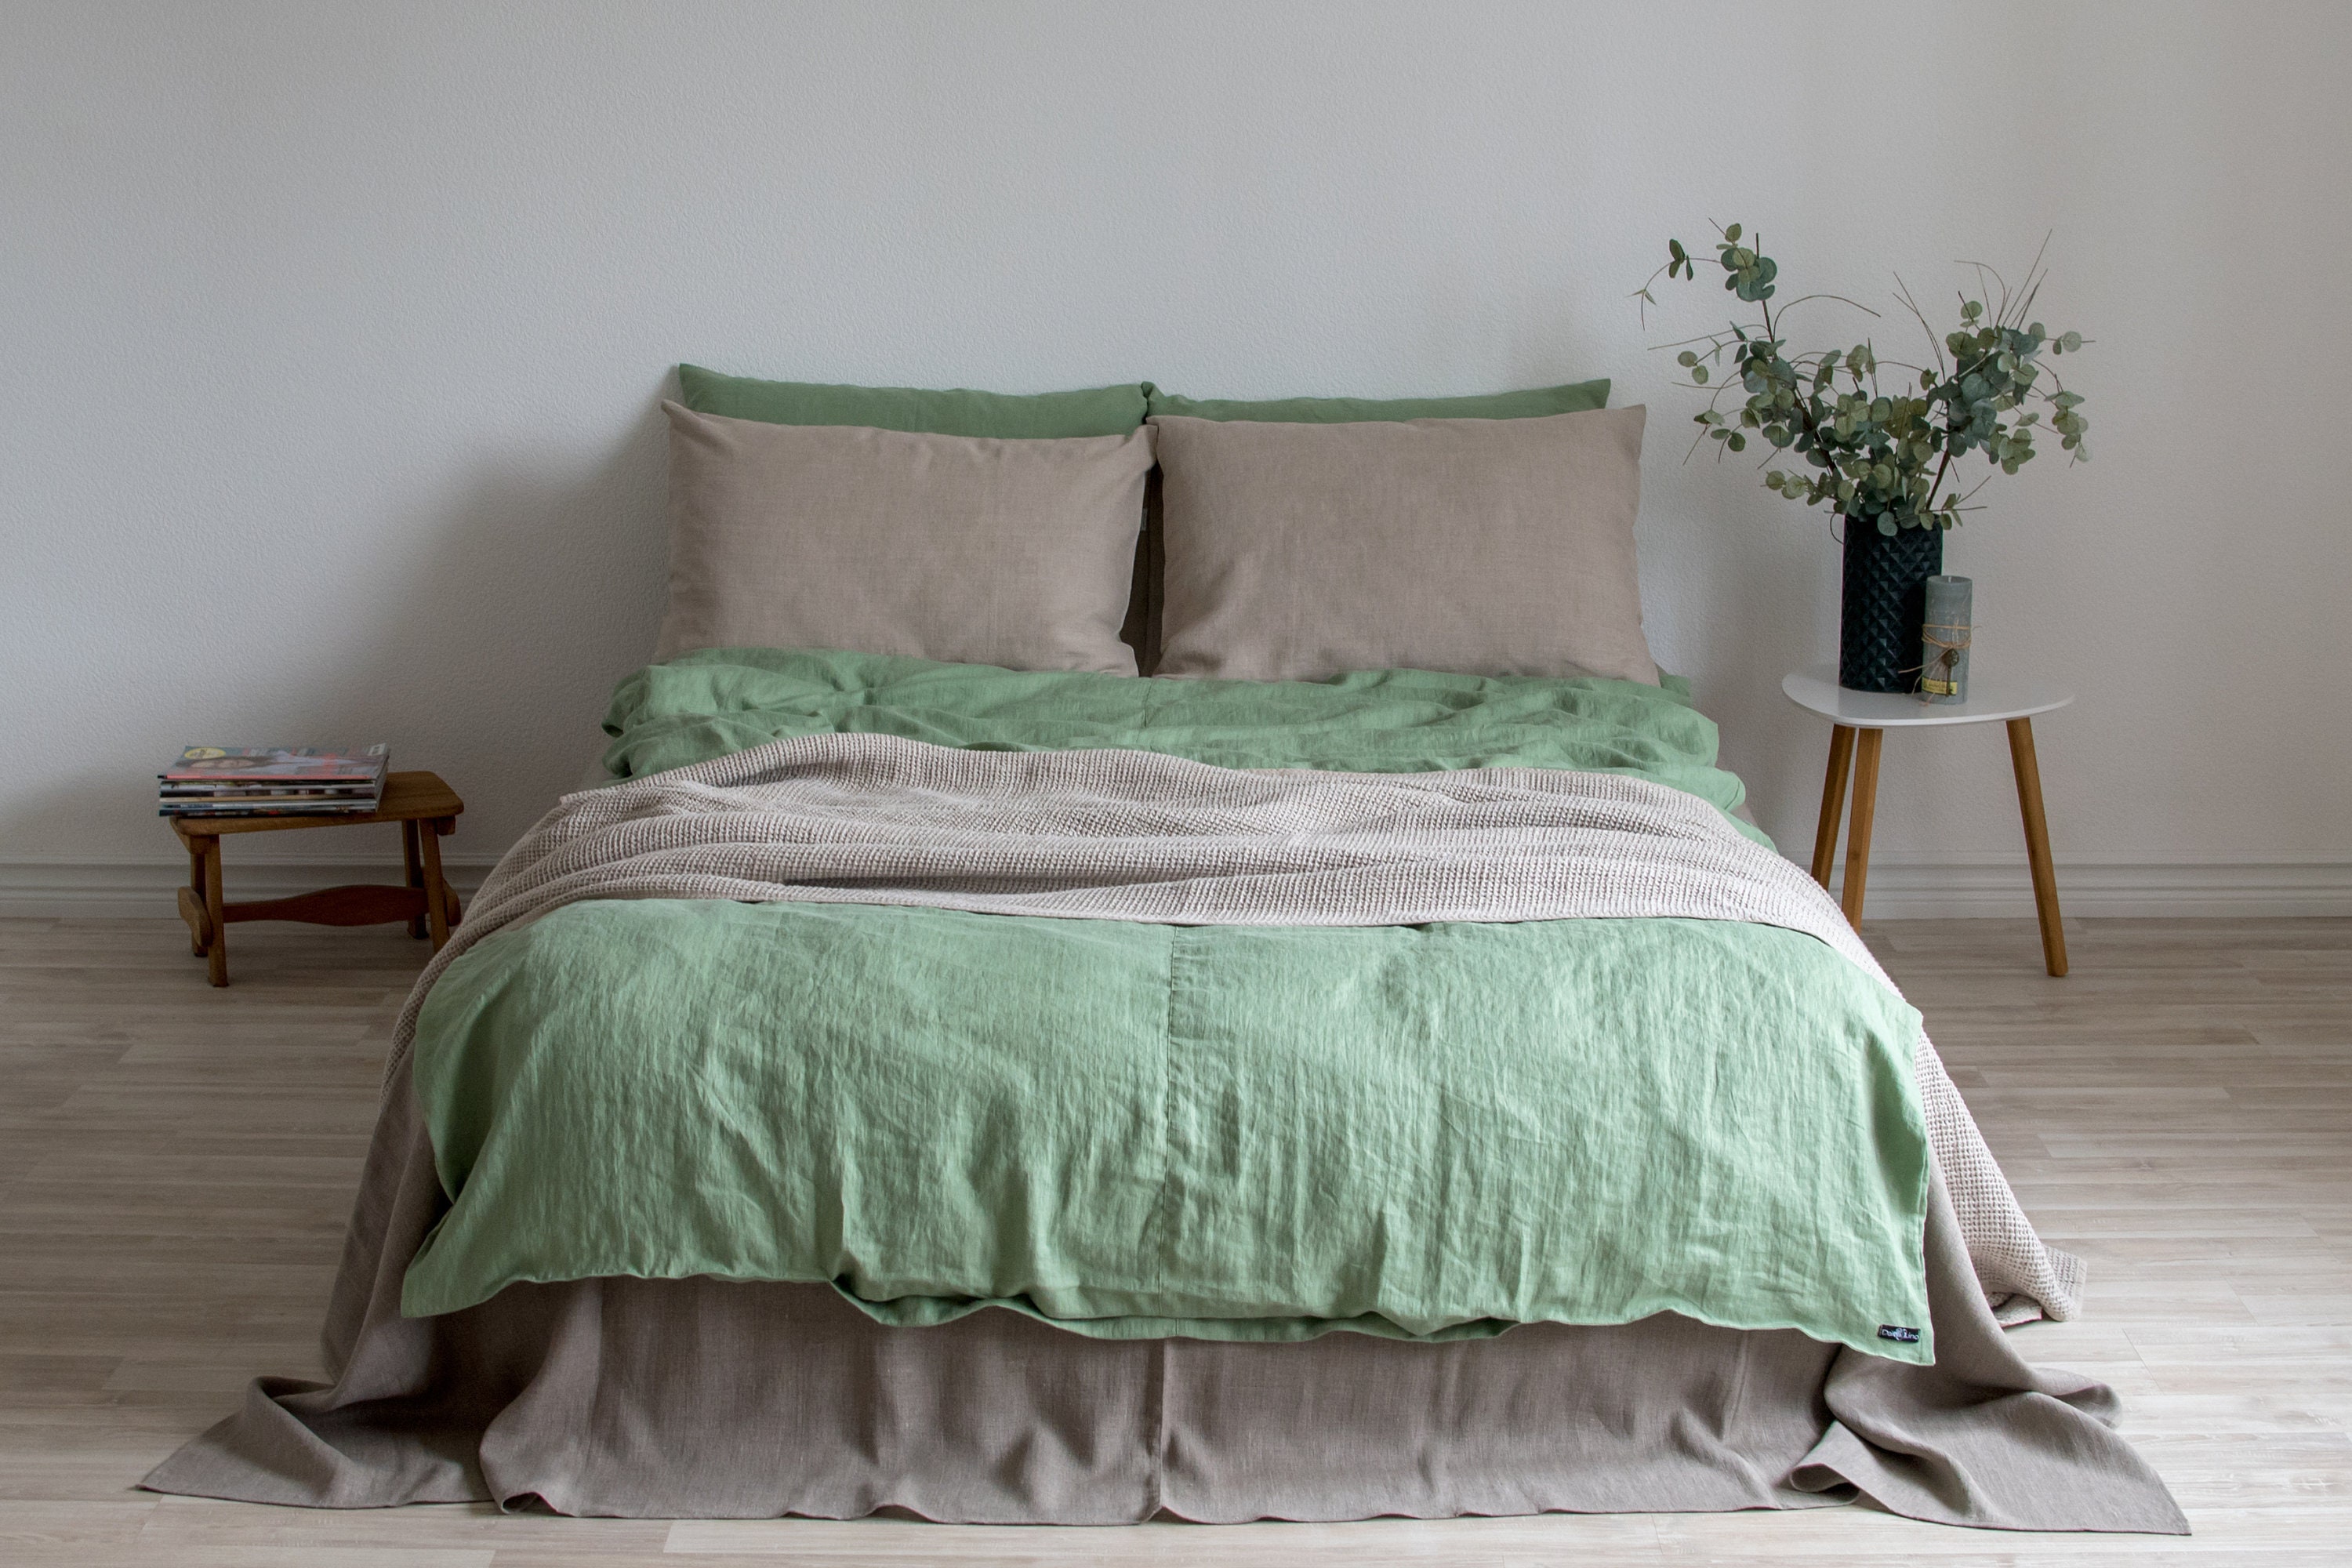 Basil Green Washed Linen Duvet Cover With Buttons 100 Linen Etsy